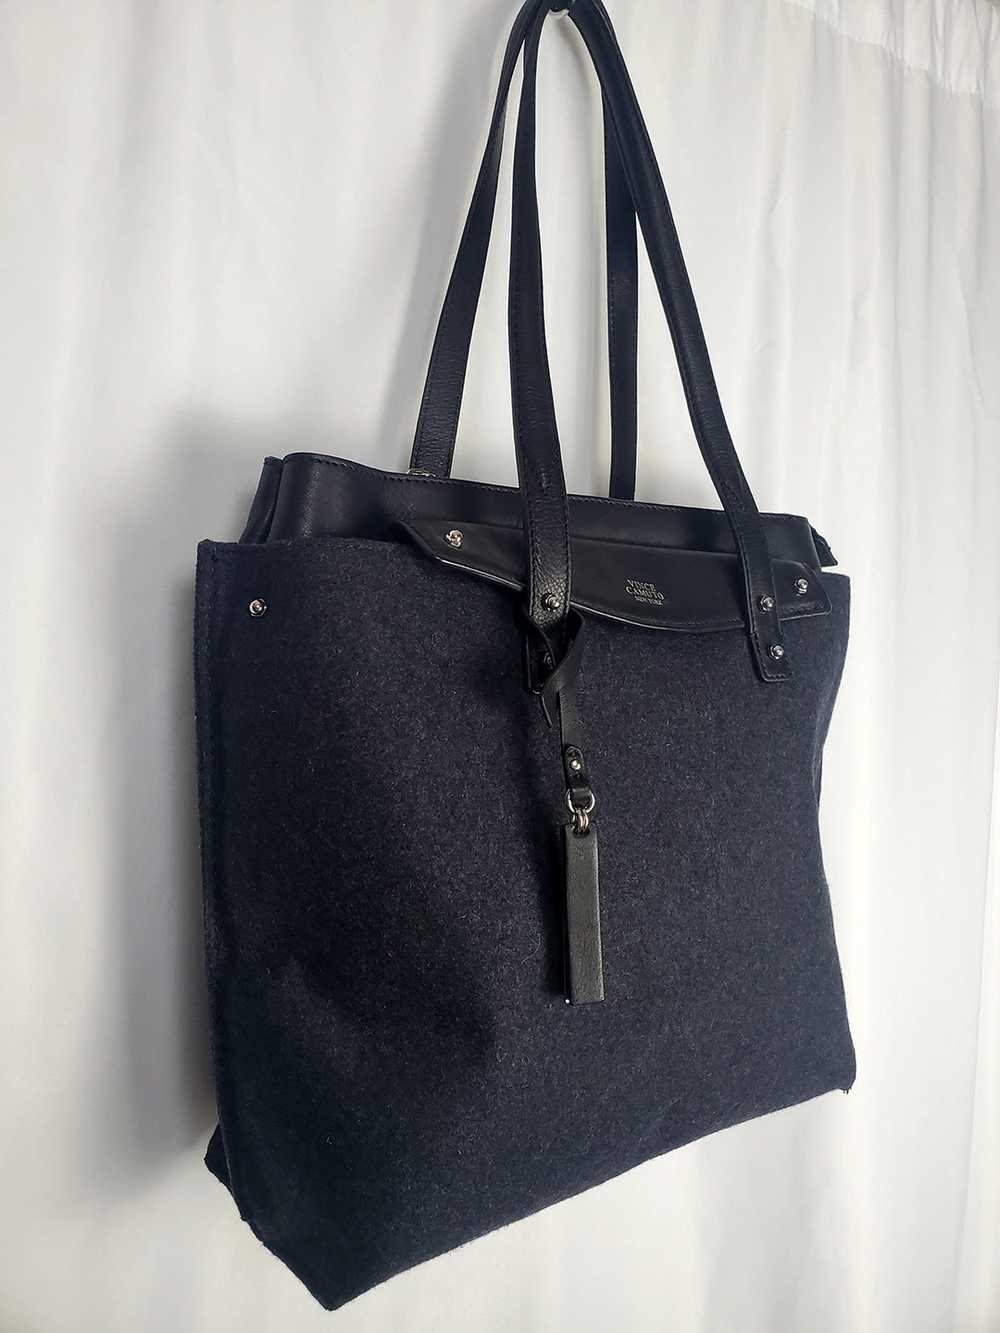 Vince Camuto Charcoal Wool & Black Leather Bag NWT - image 2